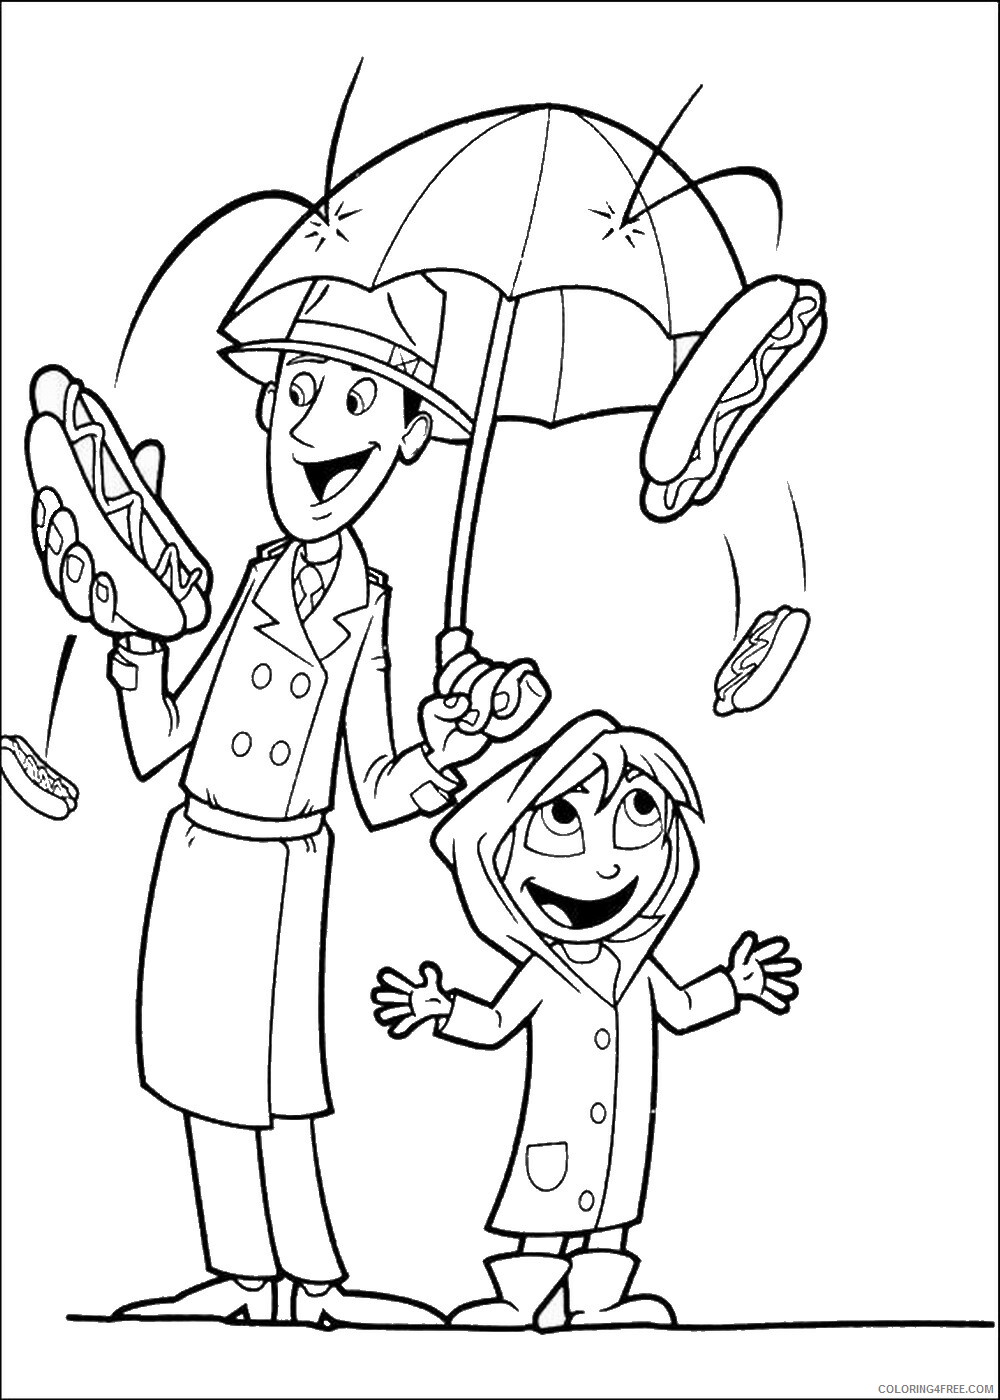 Cloudy with a Chance of Meatballs Coloring Pages TV Film Printable 2020 02217 Coloring4free